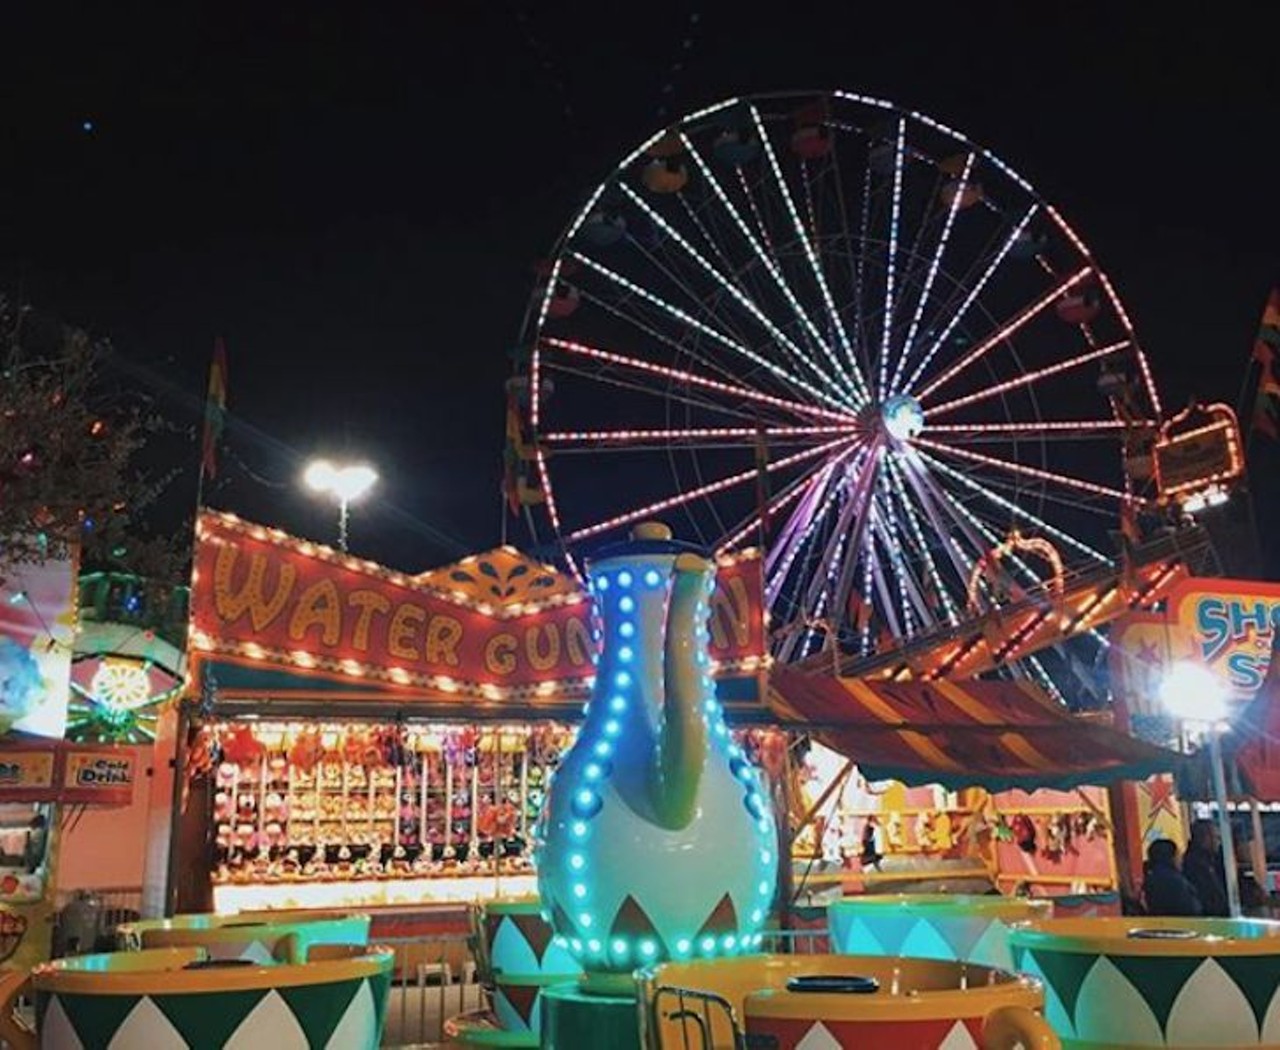 Santa&#146;s Winter Wonderland Village
413 N. Alafaya Trail 
December 1, 2017 - January 1, 2018
It&#146;s not officially Christmas until you take the family to the carnival. Bask in all of the holiday food, amusement park rides, and Christmas lights the village has to offer.
Photo via candidlyshady/Instagram